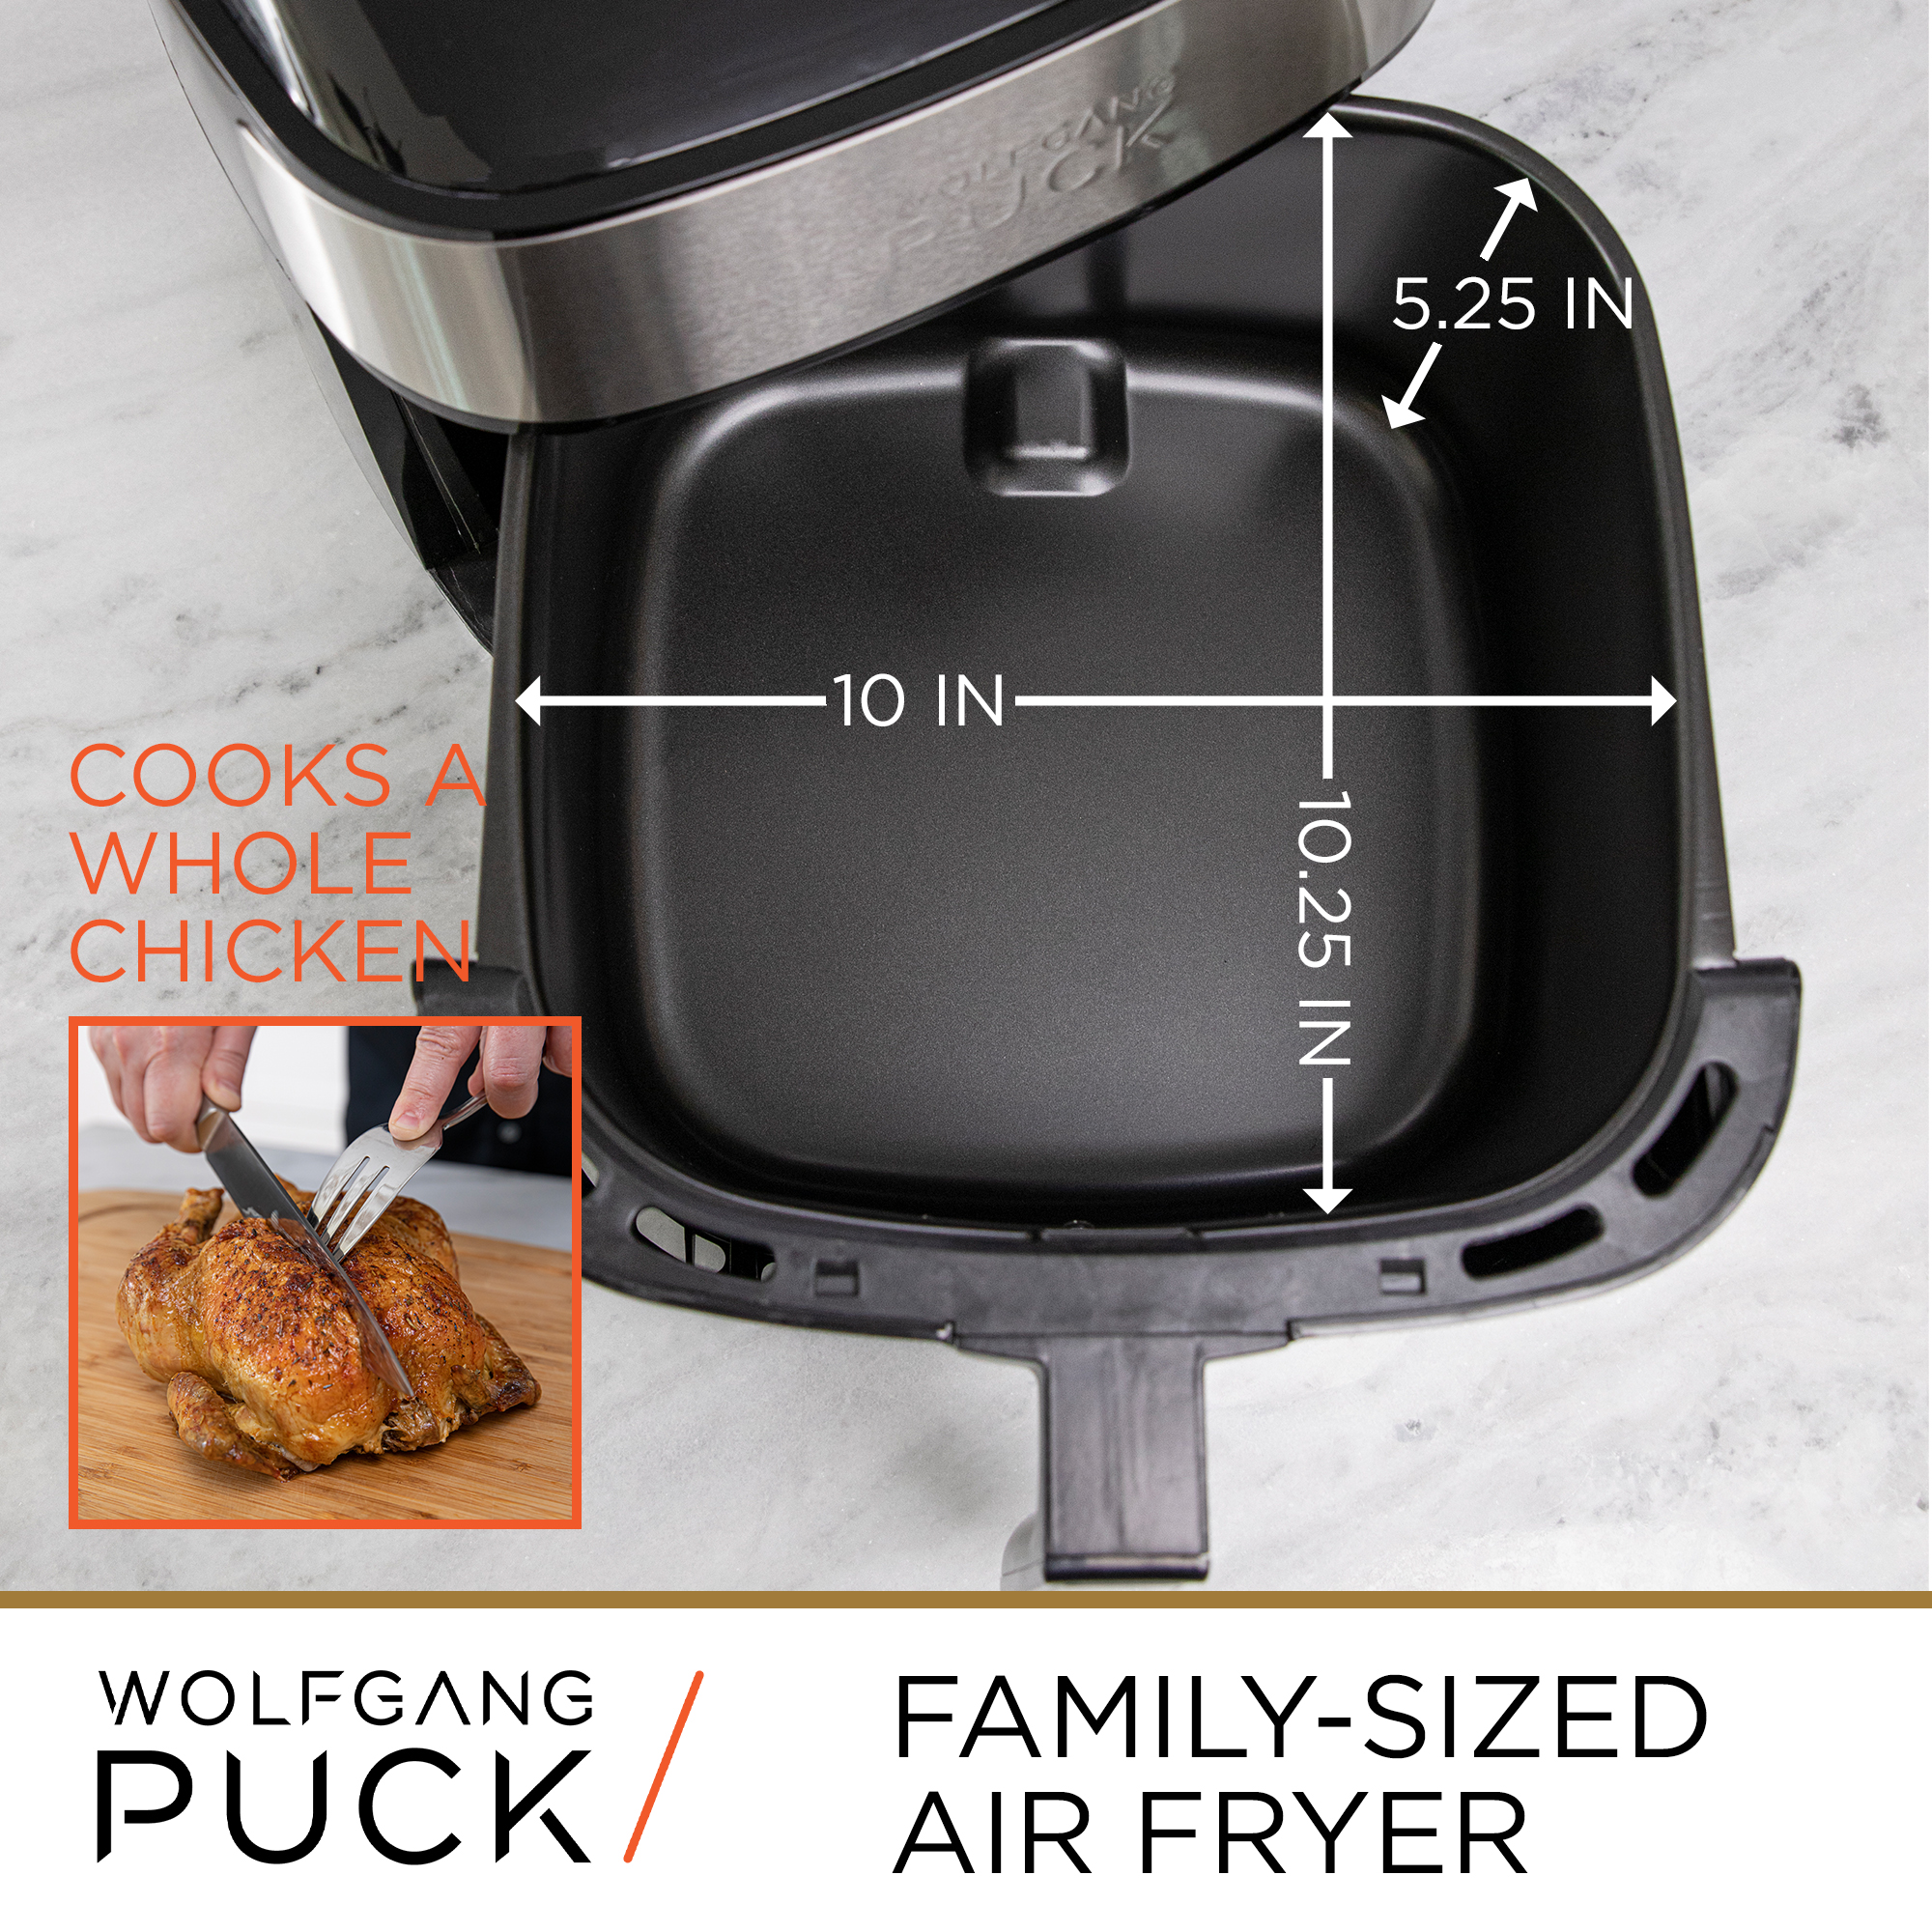 Wolfgang  Puck Wolfgang Puck 9.7QT Stainless Steel Air Fryer, Large Single Basket Design, Simple Dial Controls, Nonstick Interior, Includes Co